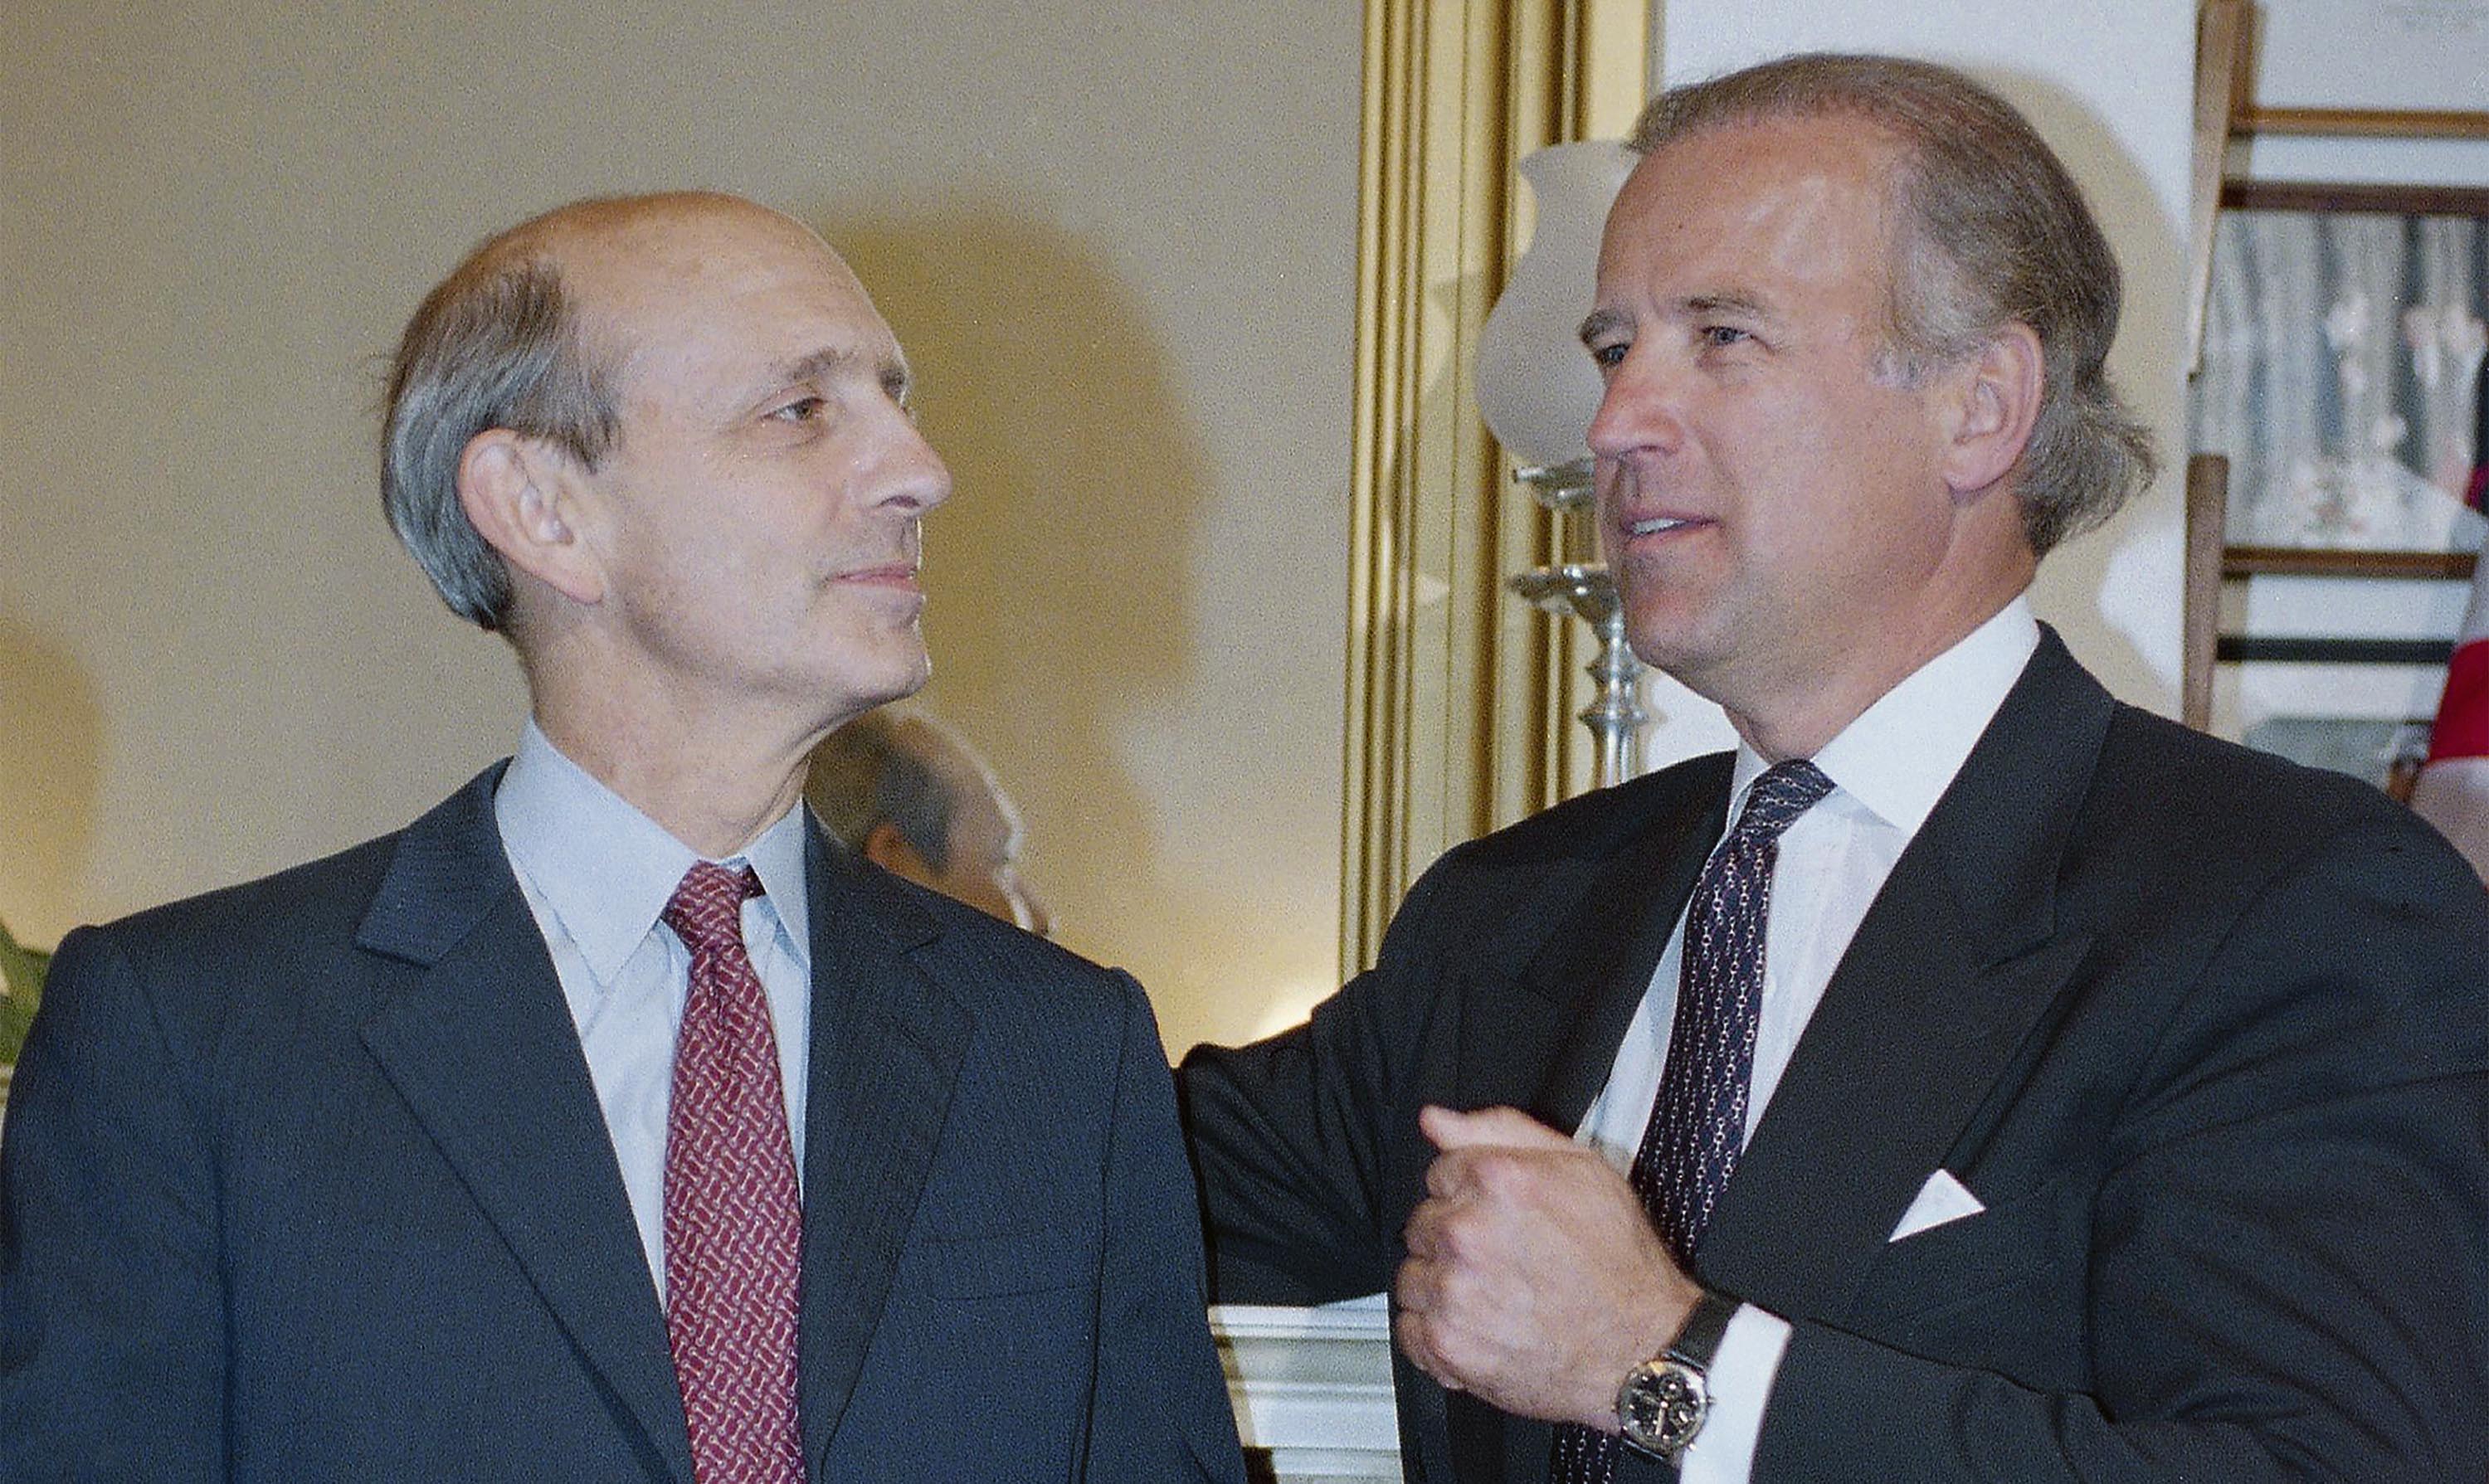 Joe Biden, then-chairman of the Senate Judiciary Committee, right, talks to President Clinton’s Supreme Court nominee Stephen Breyer on Capitol Hill in May 1994.